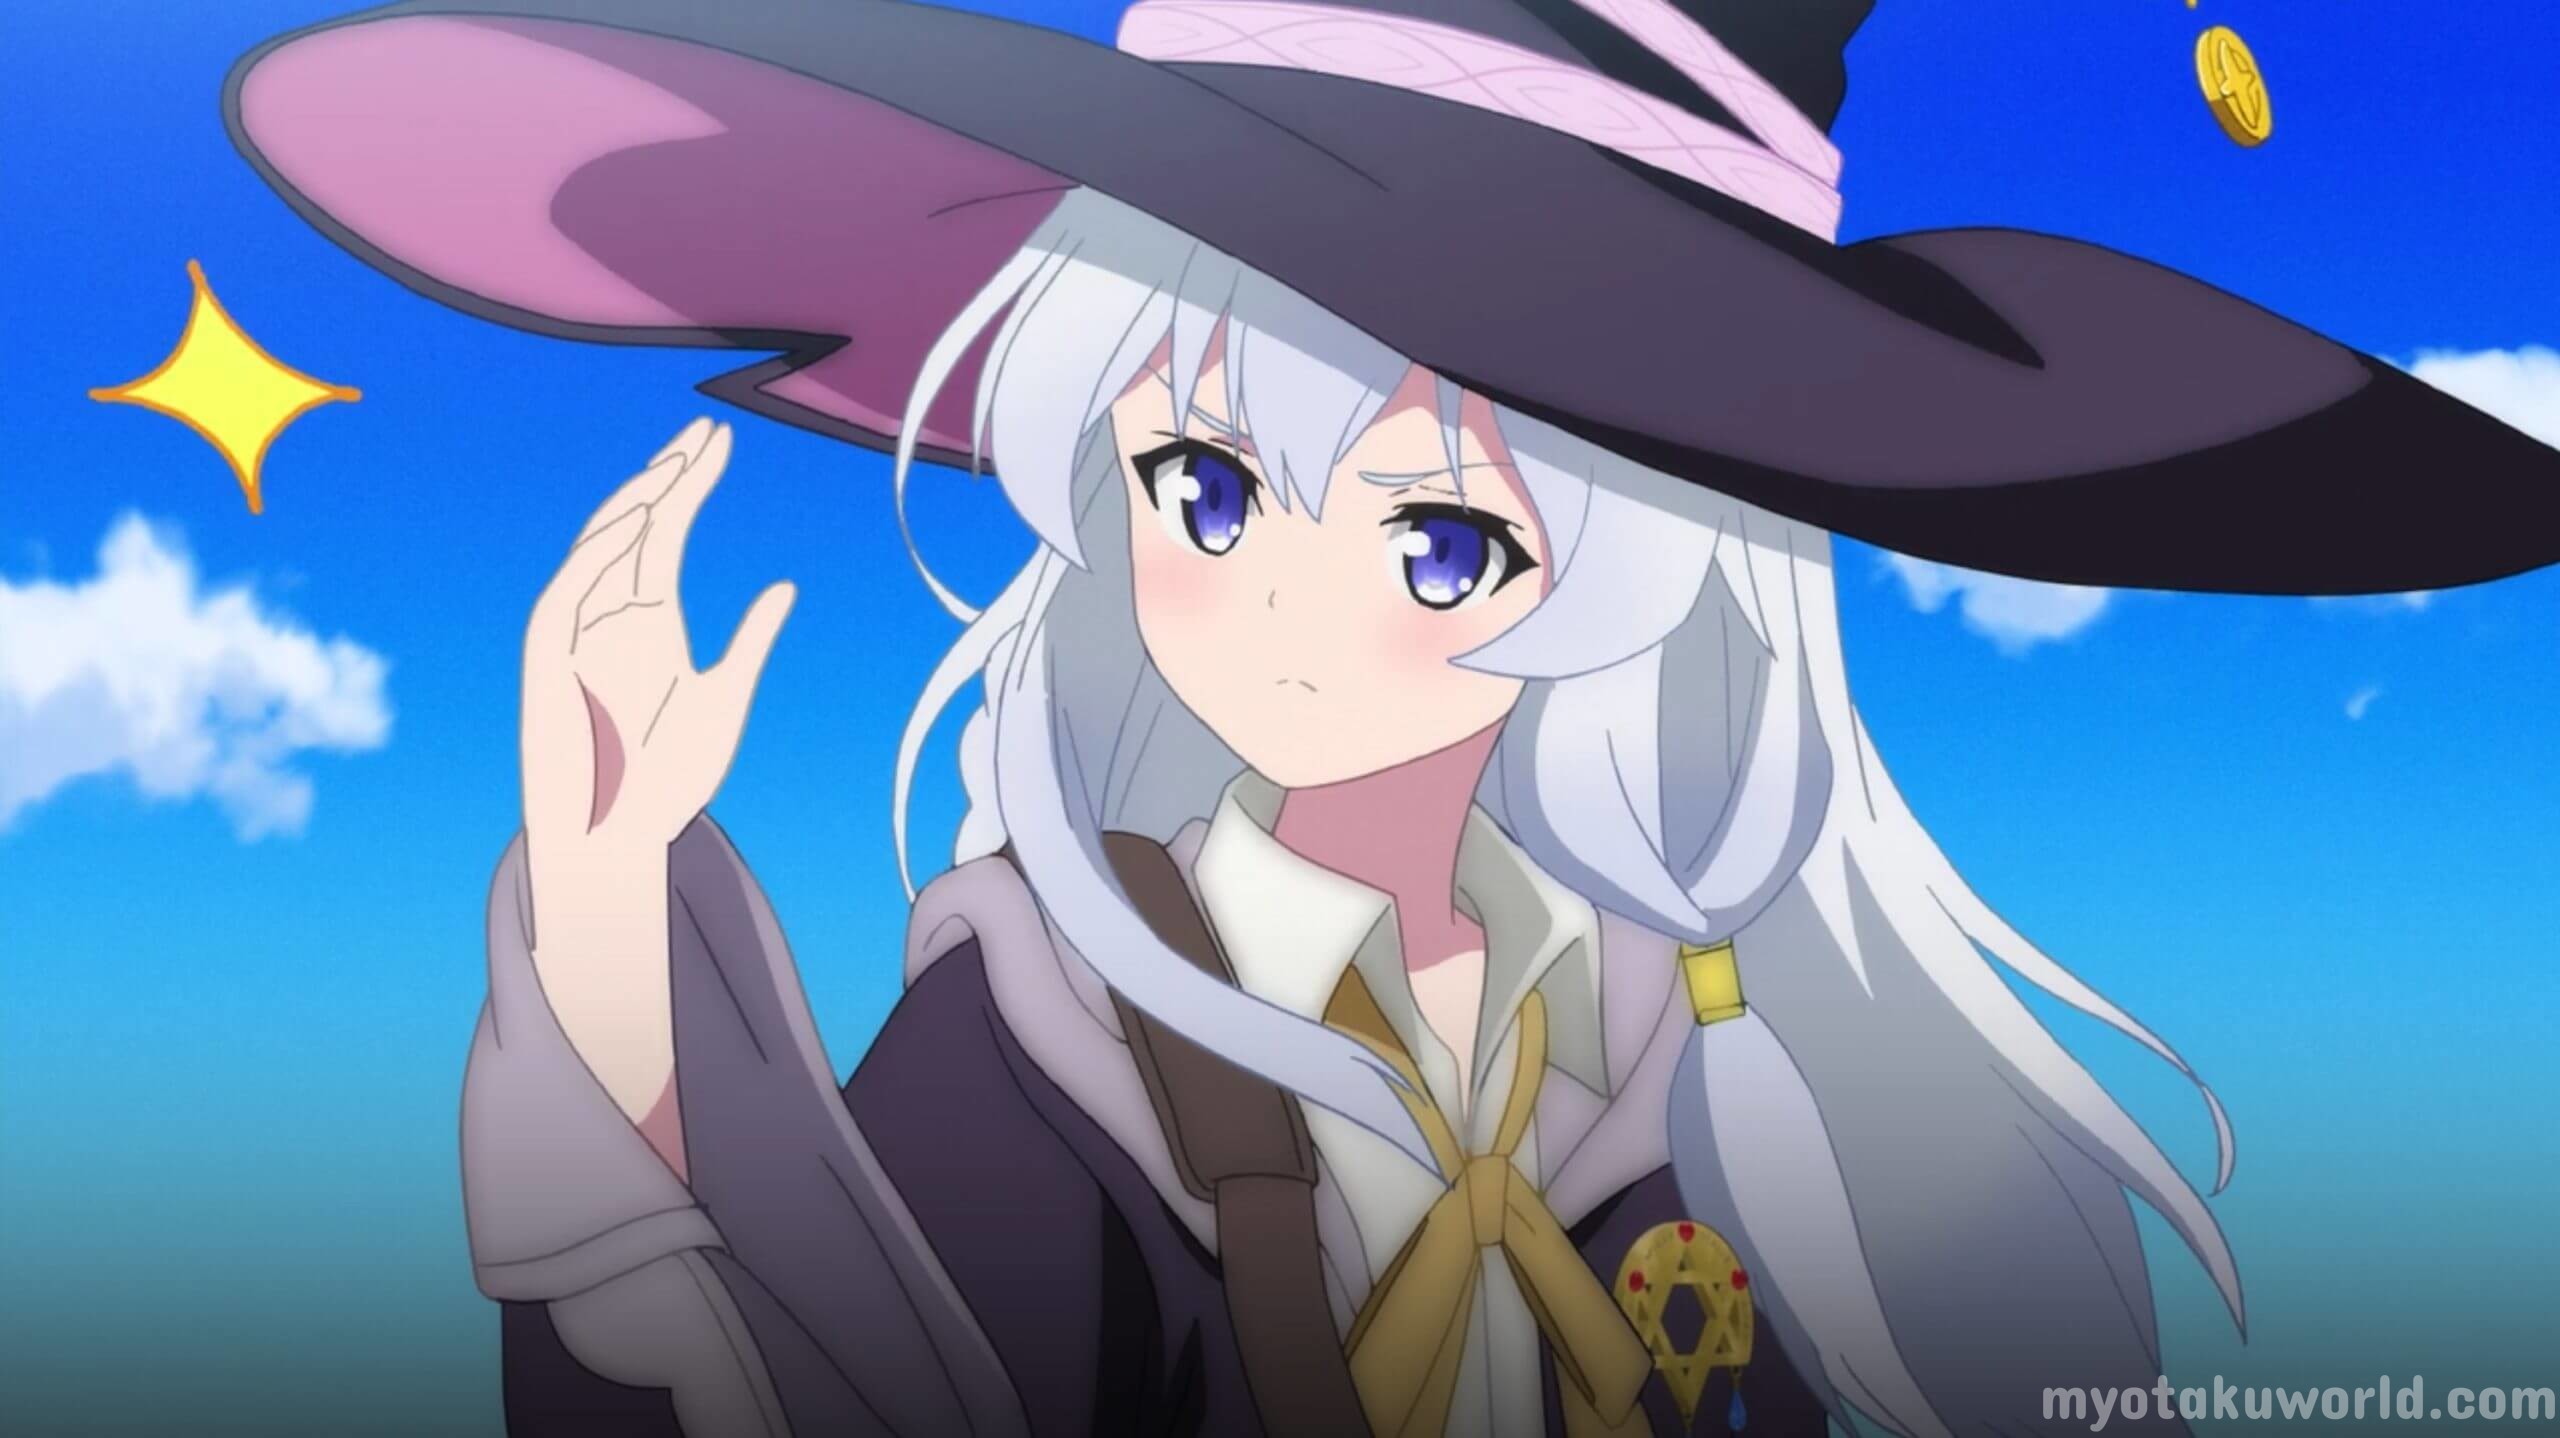 Witch Anime